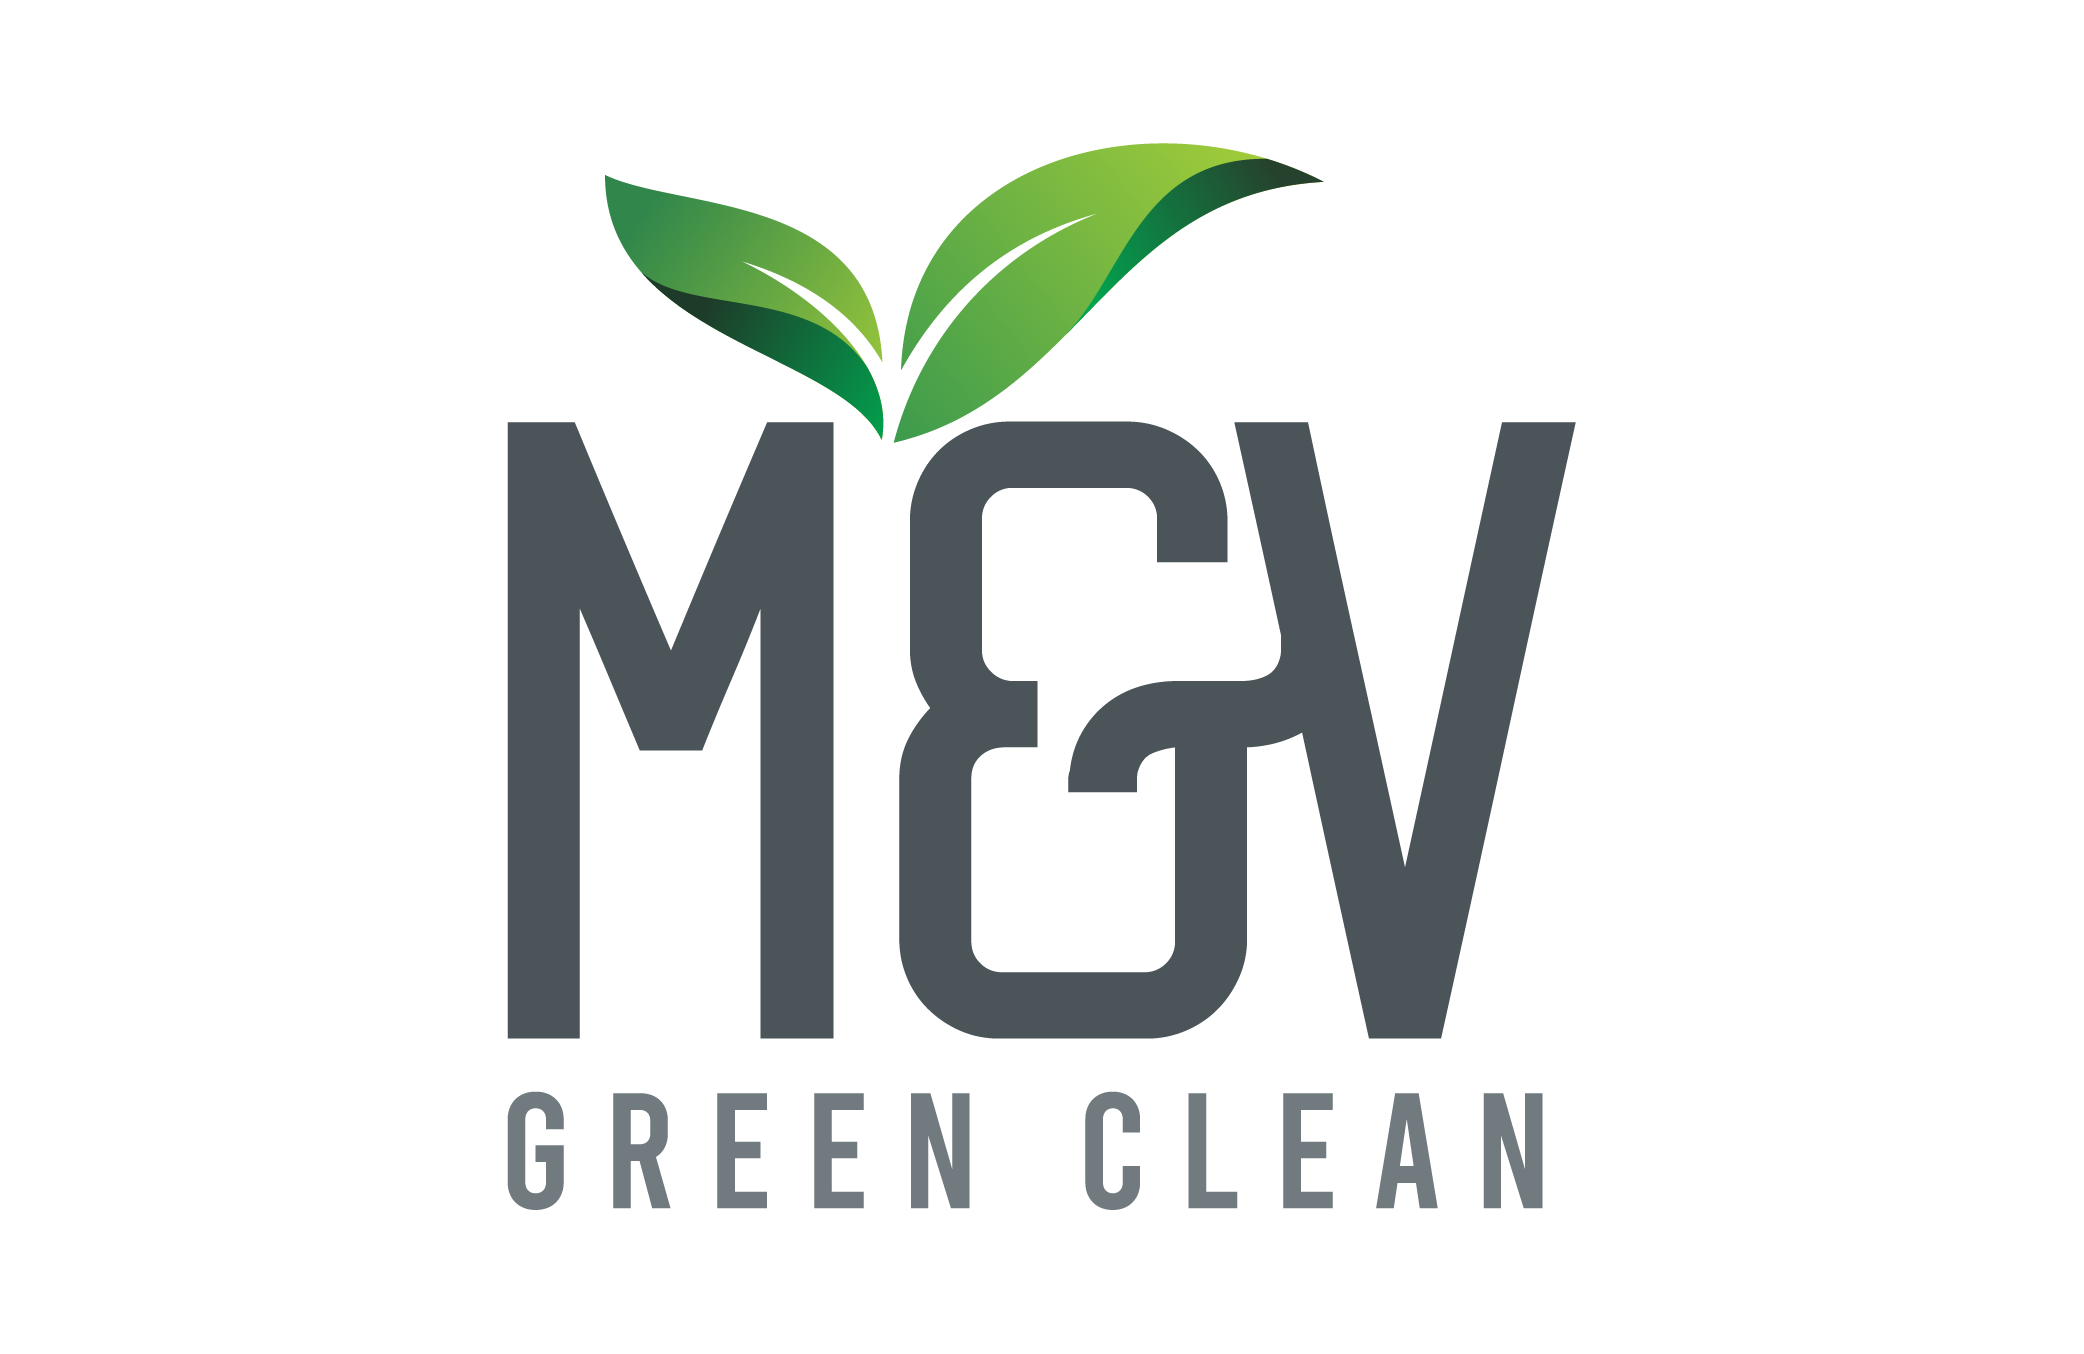 Welcome to M&V Green Clean